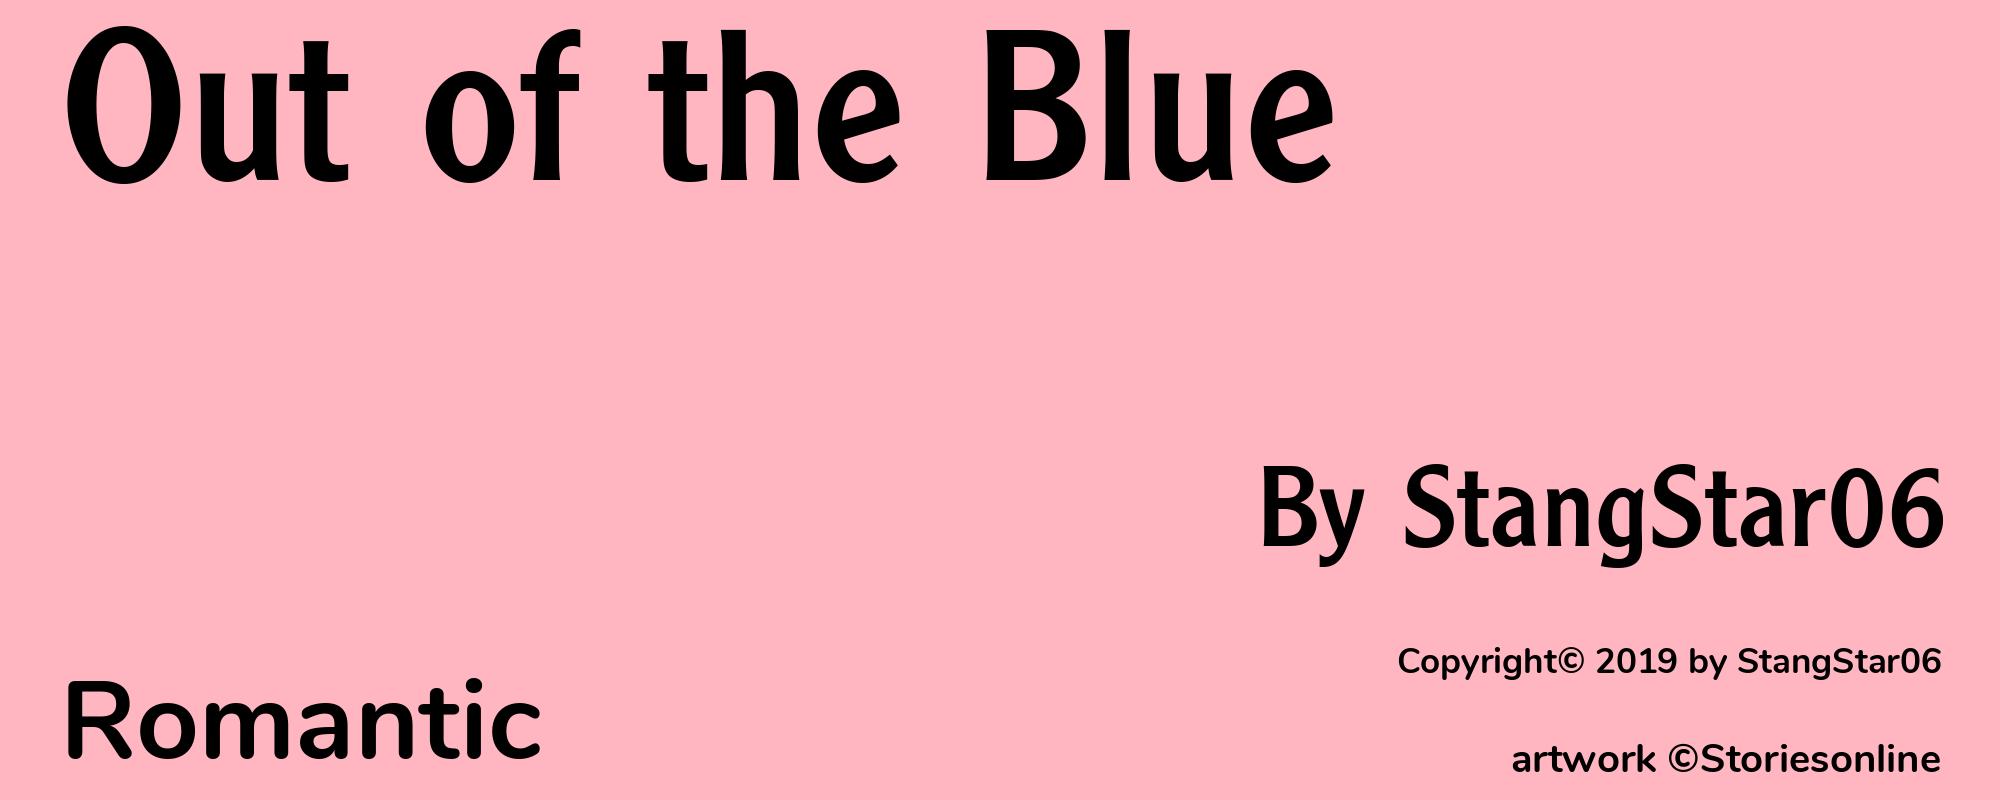 Out of the Blue - Cover